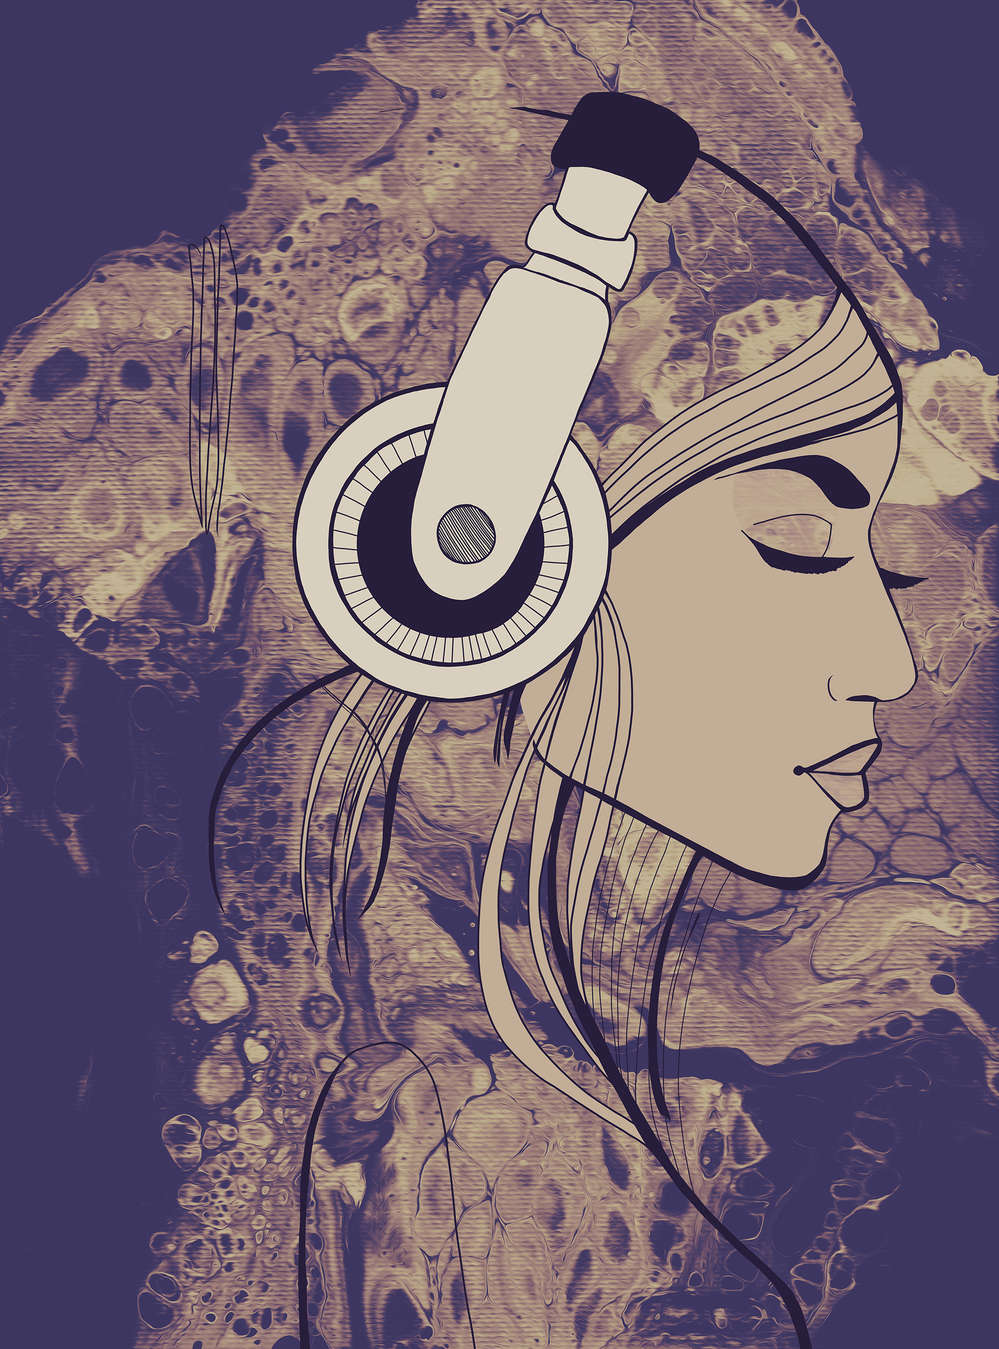             Photo wallpaper music woman with headphones in line art style
        